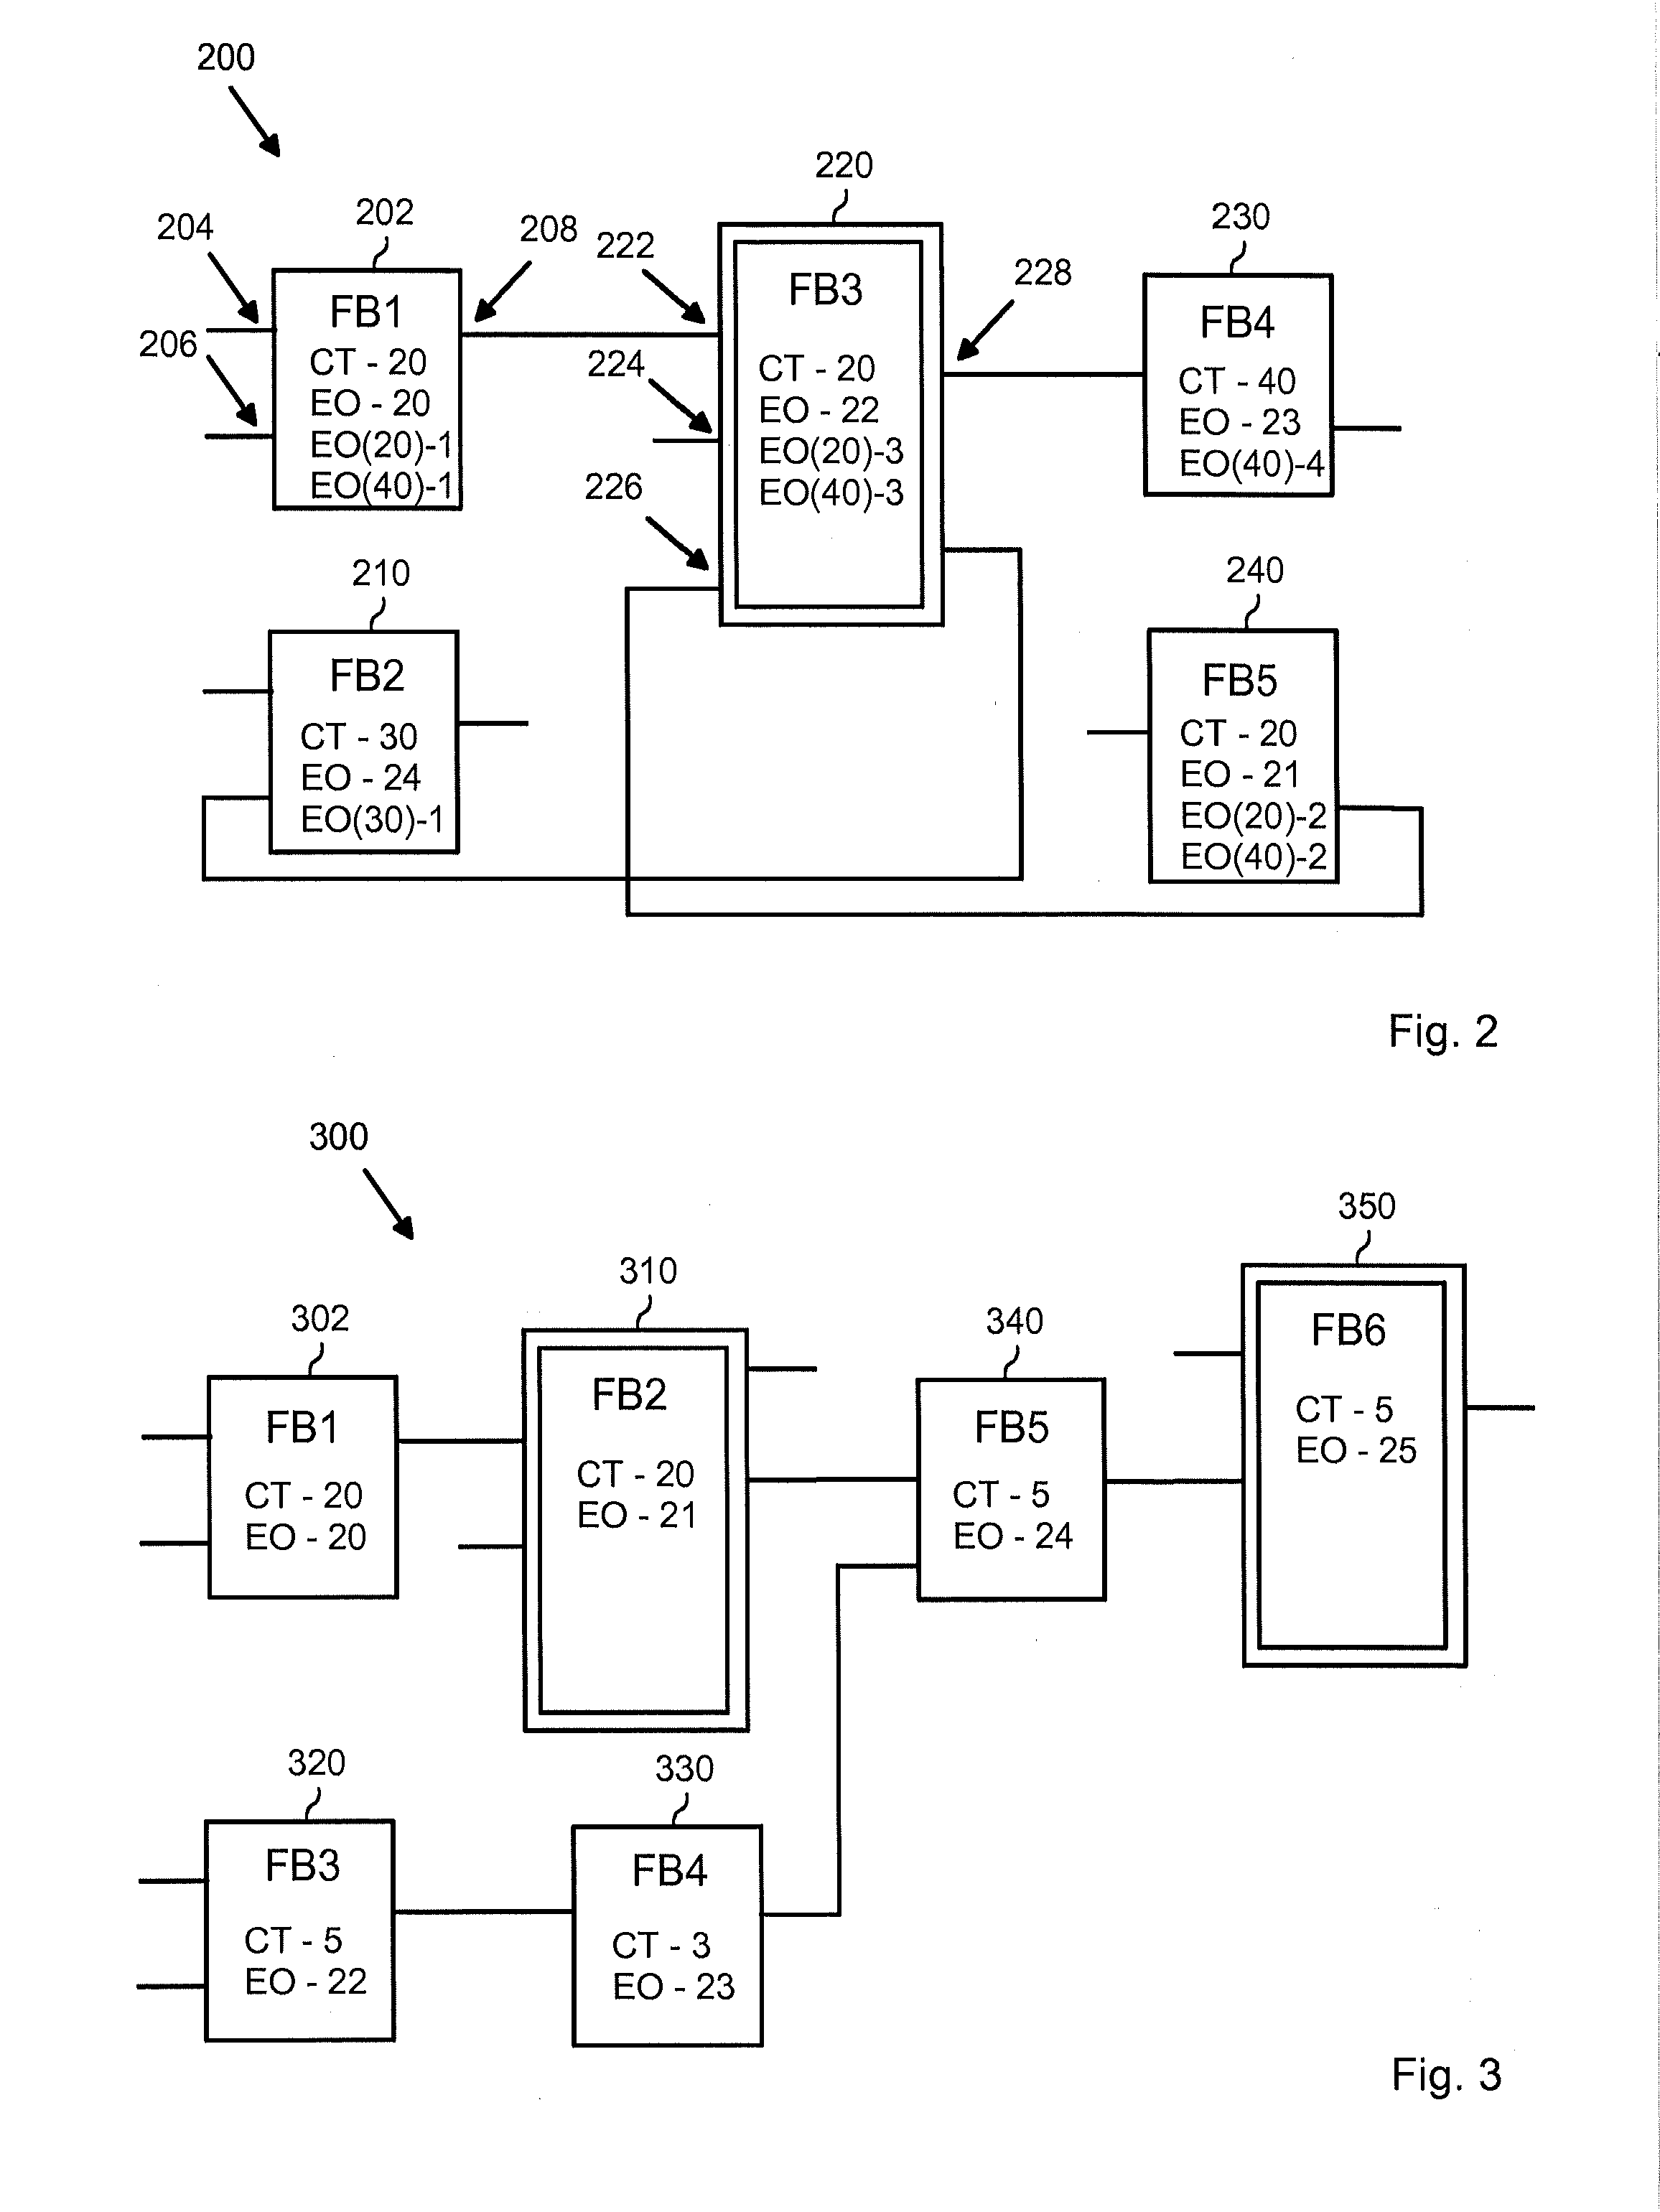 Configuring of intelligent electronic device